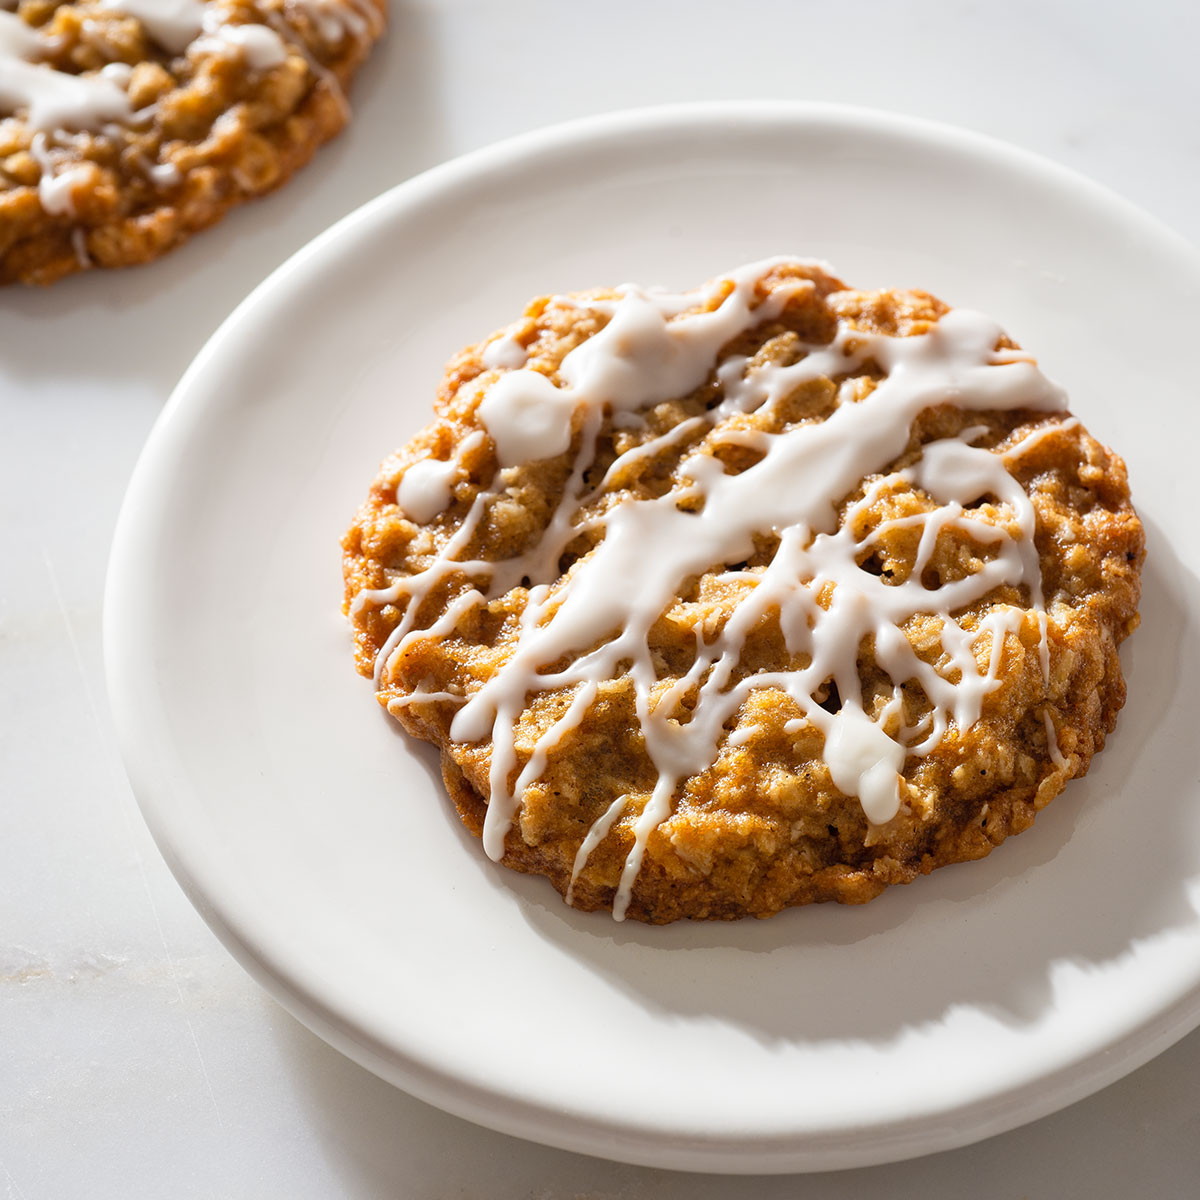 A large glazed Holiday oatmeal cookie on a plate.